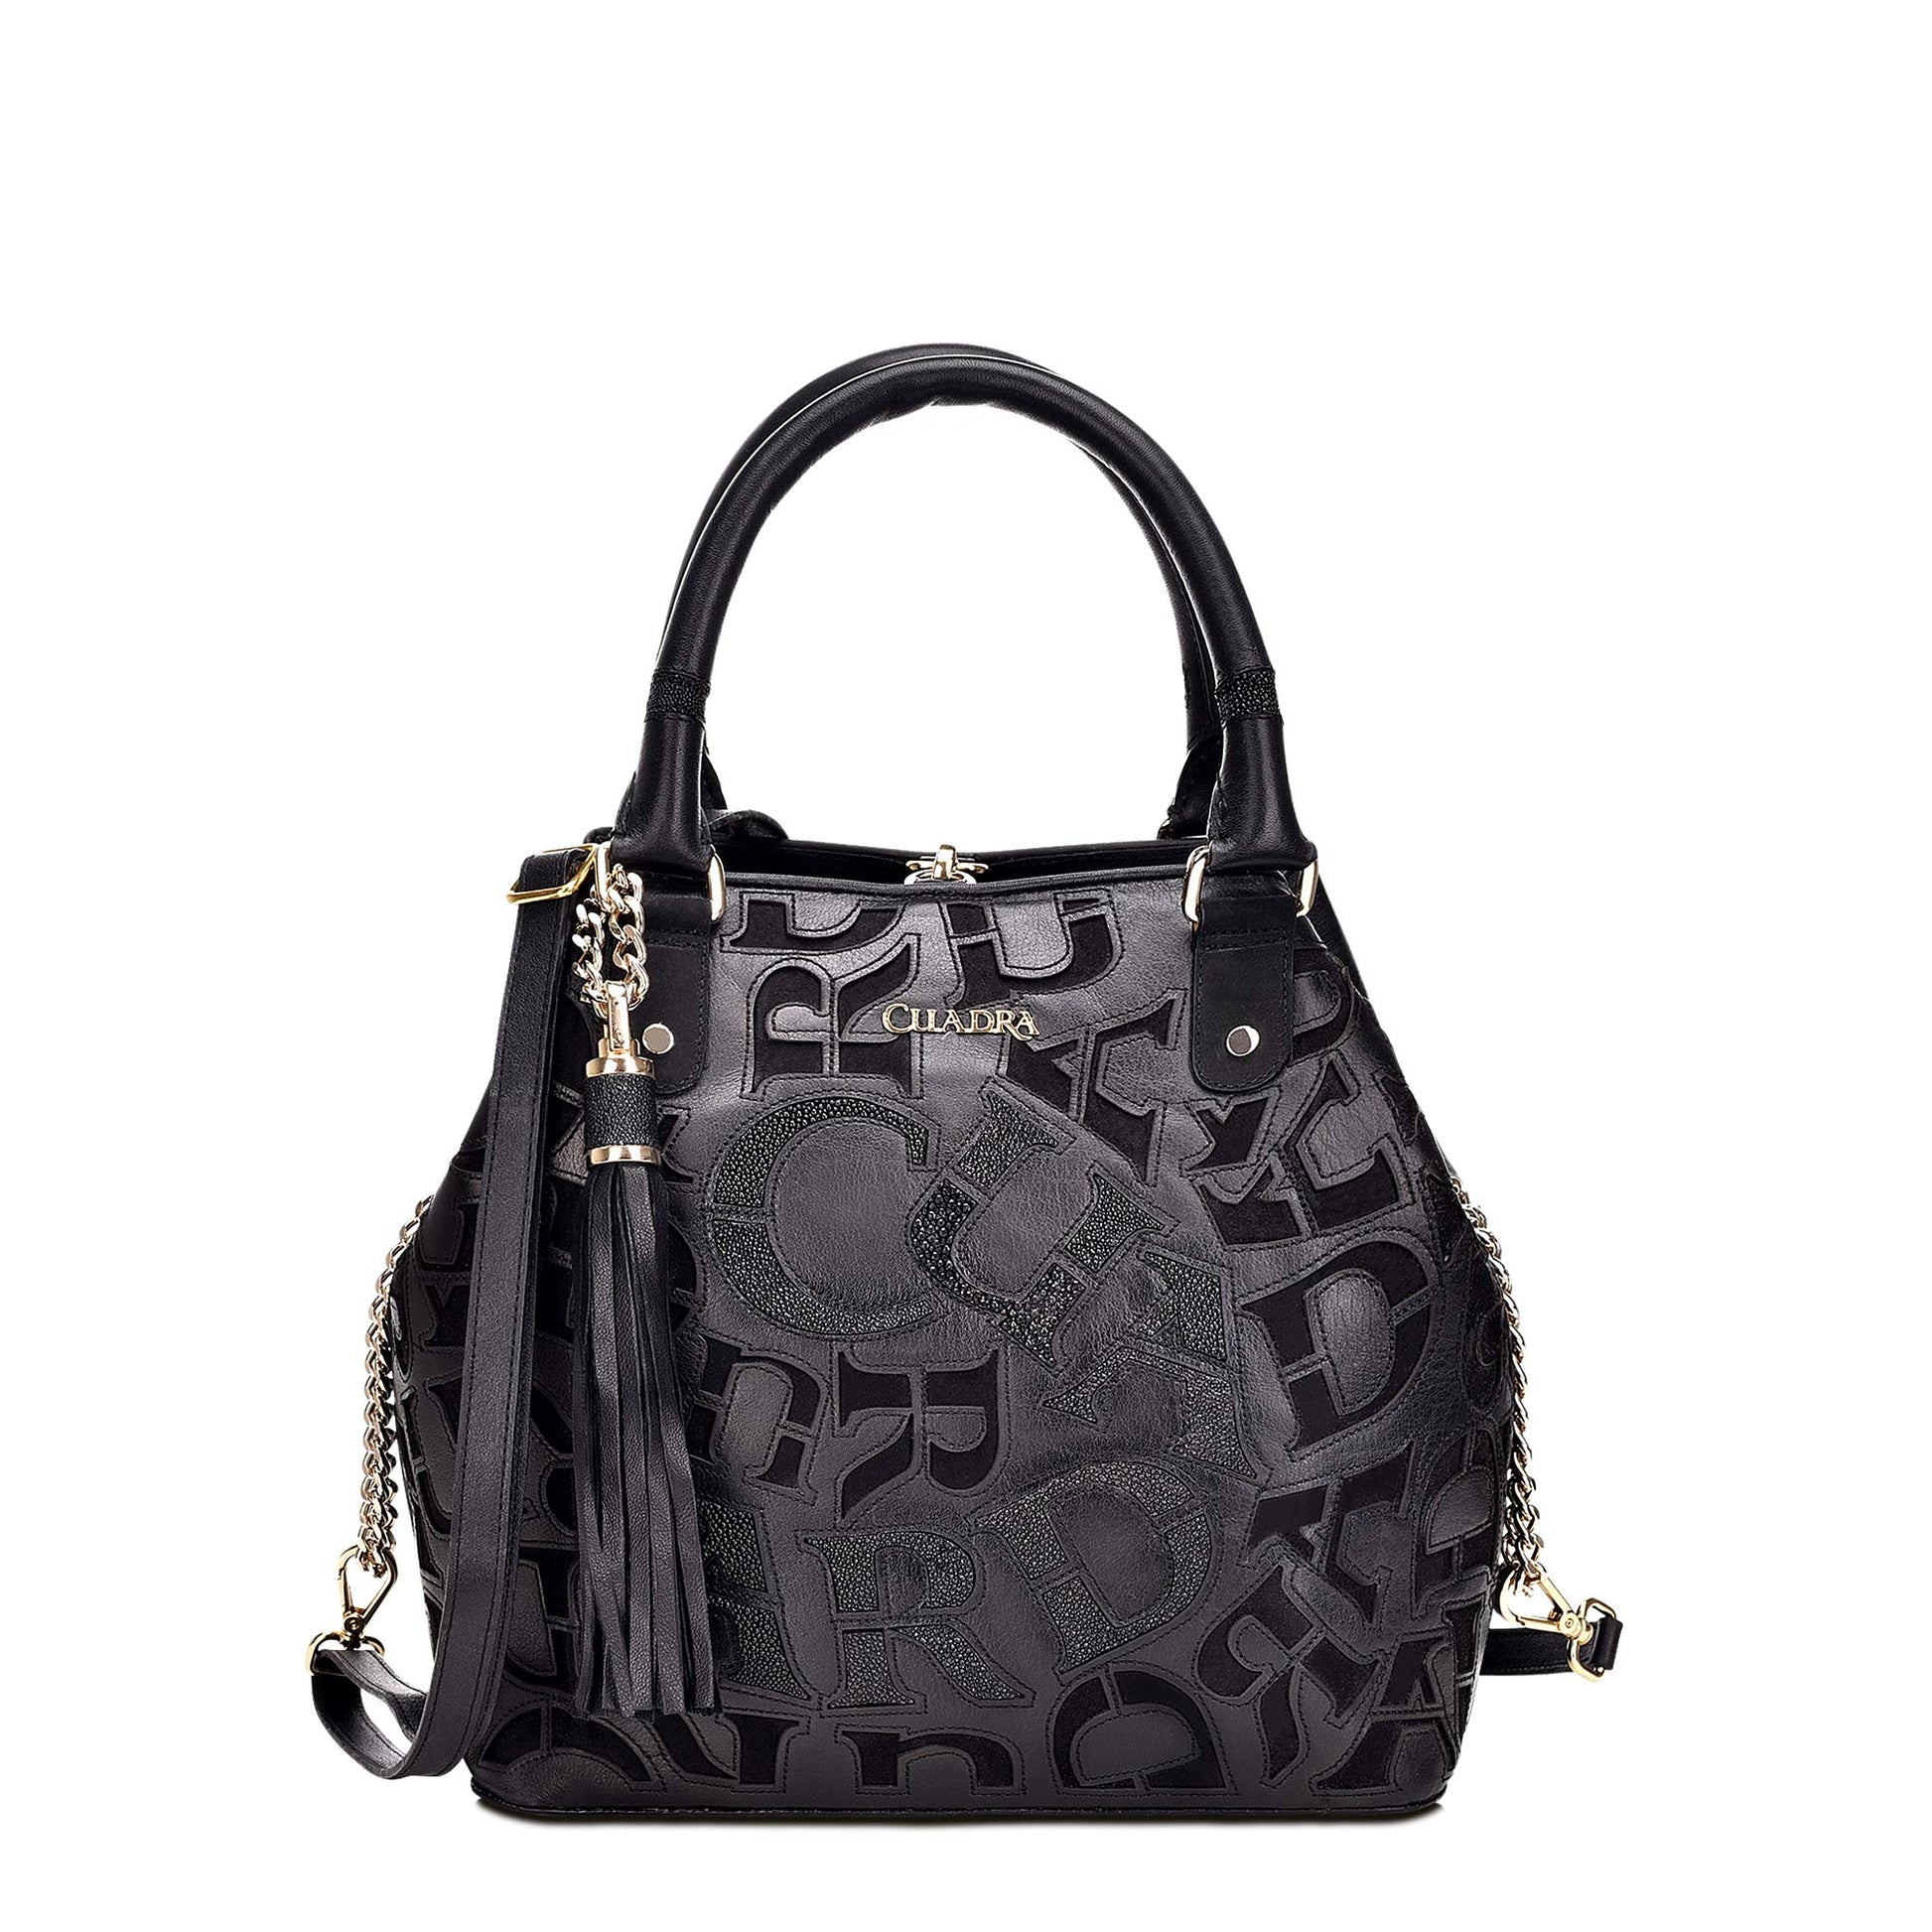 Guess Women's Going Out Bag